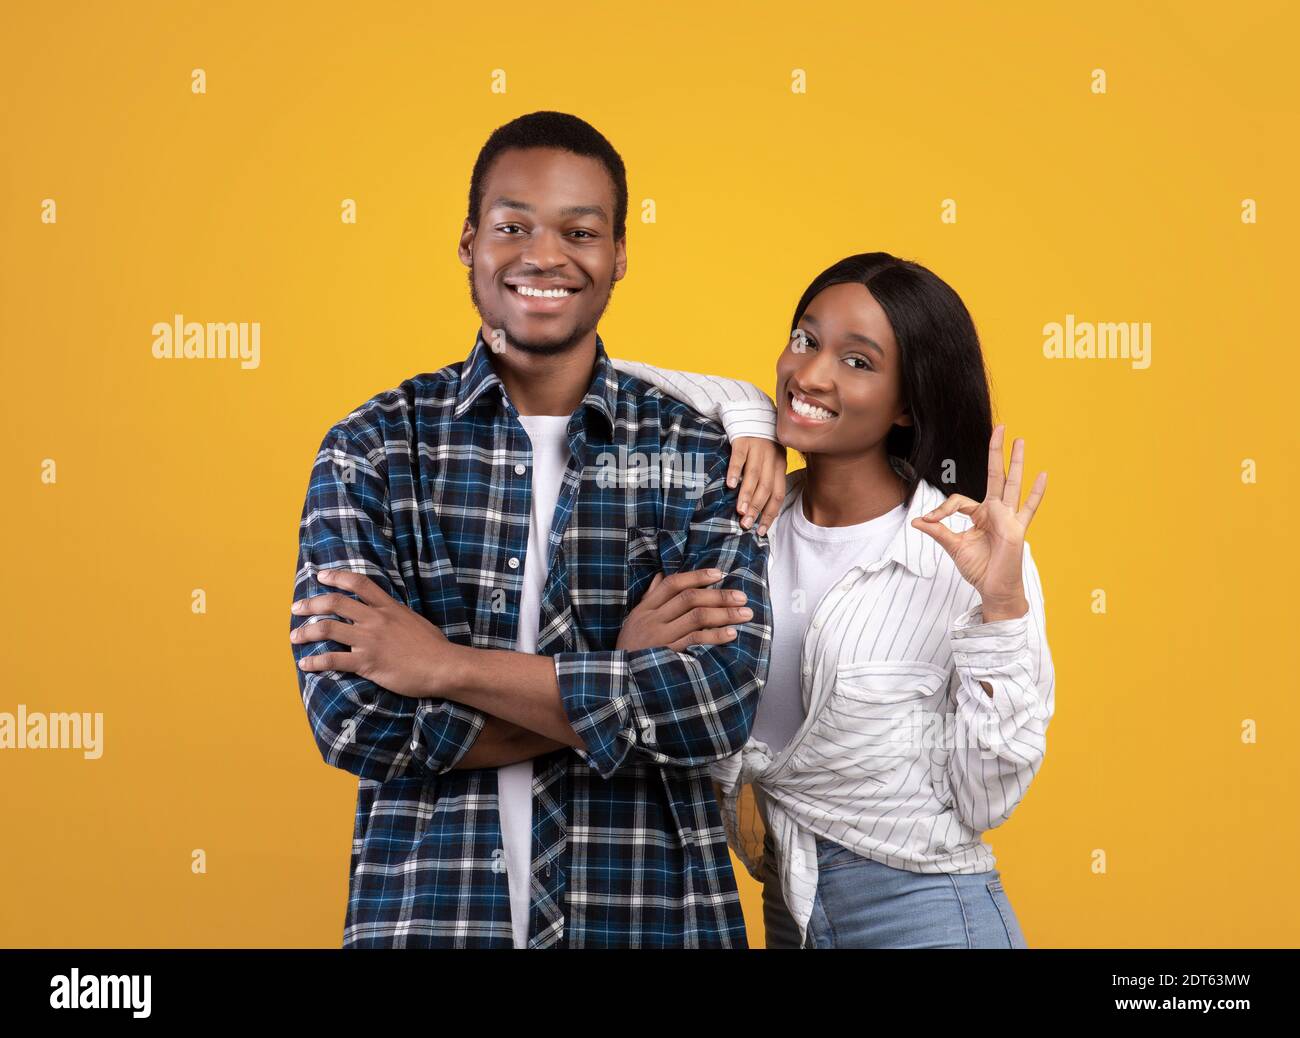 Young cheerful african american female in casual put her hand on guys shoulder Stock Photo